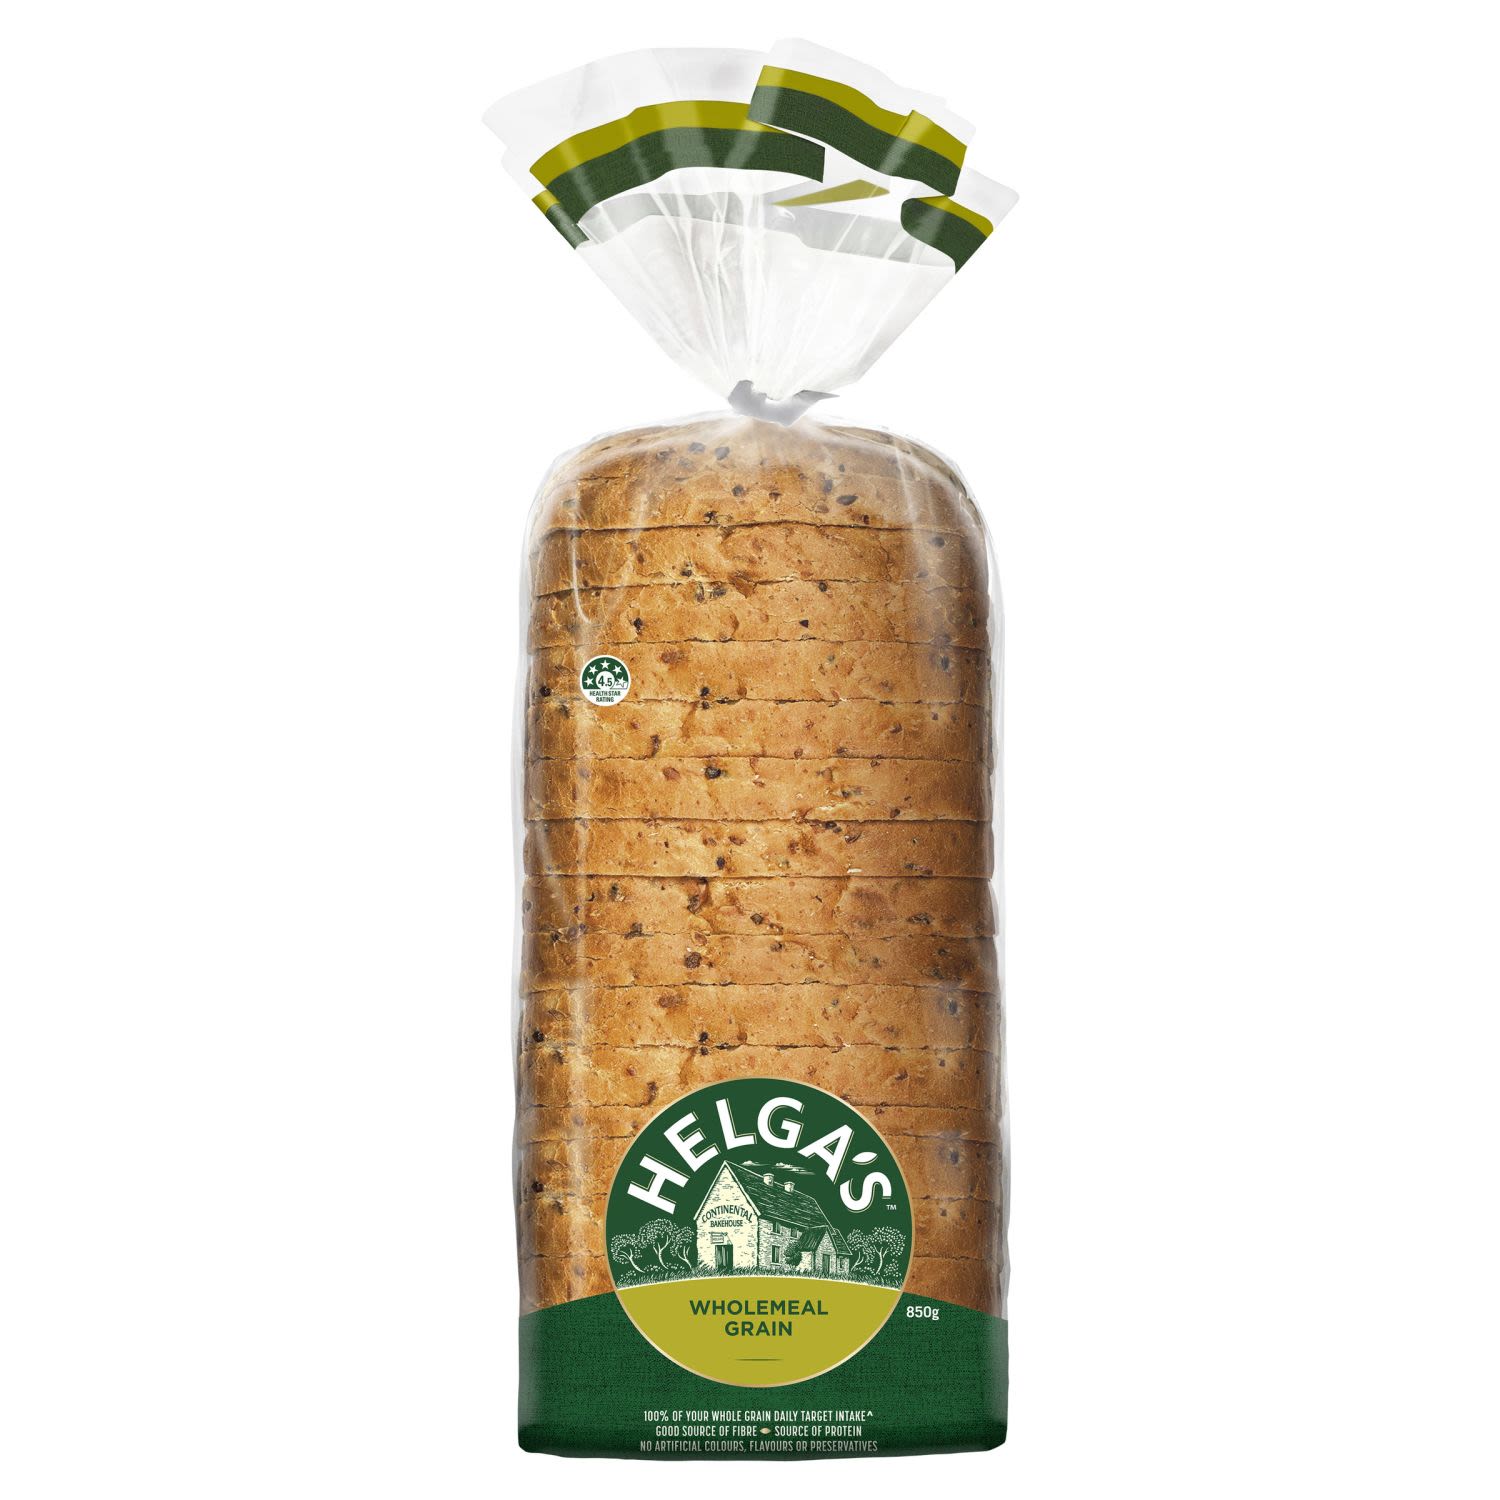 You can never go wrong with Helga's Wholemeal Grain Loaf Sliced Bread. A fantastic breakfast option for everyone to enjoy, simply spread with butter and add your favourite toppings or toast with peanut butter for a quick delicious bite. The options are endless.<br /> <br /> <br /><br />Allergen: Gluten Containing Cereals| Soy<br />Allergen may be present: Soy|Gluten Containing Cereals <br /><br />Country of Origin: Made in Australia from at least 85% Australian ingredients